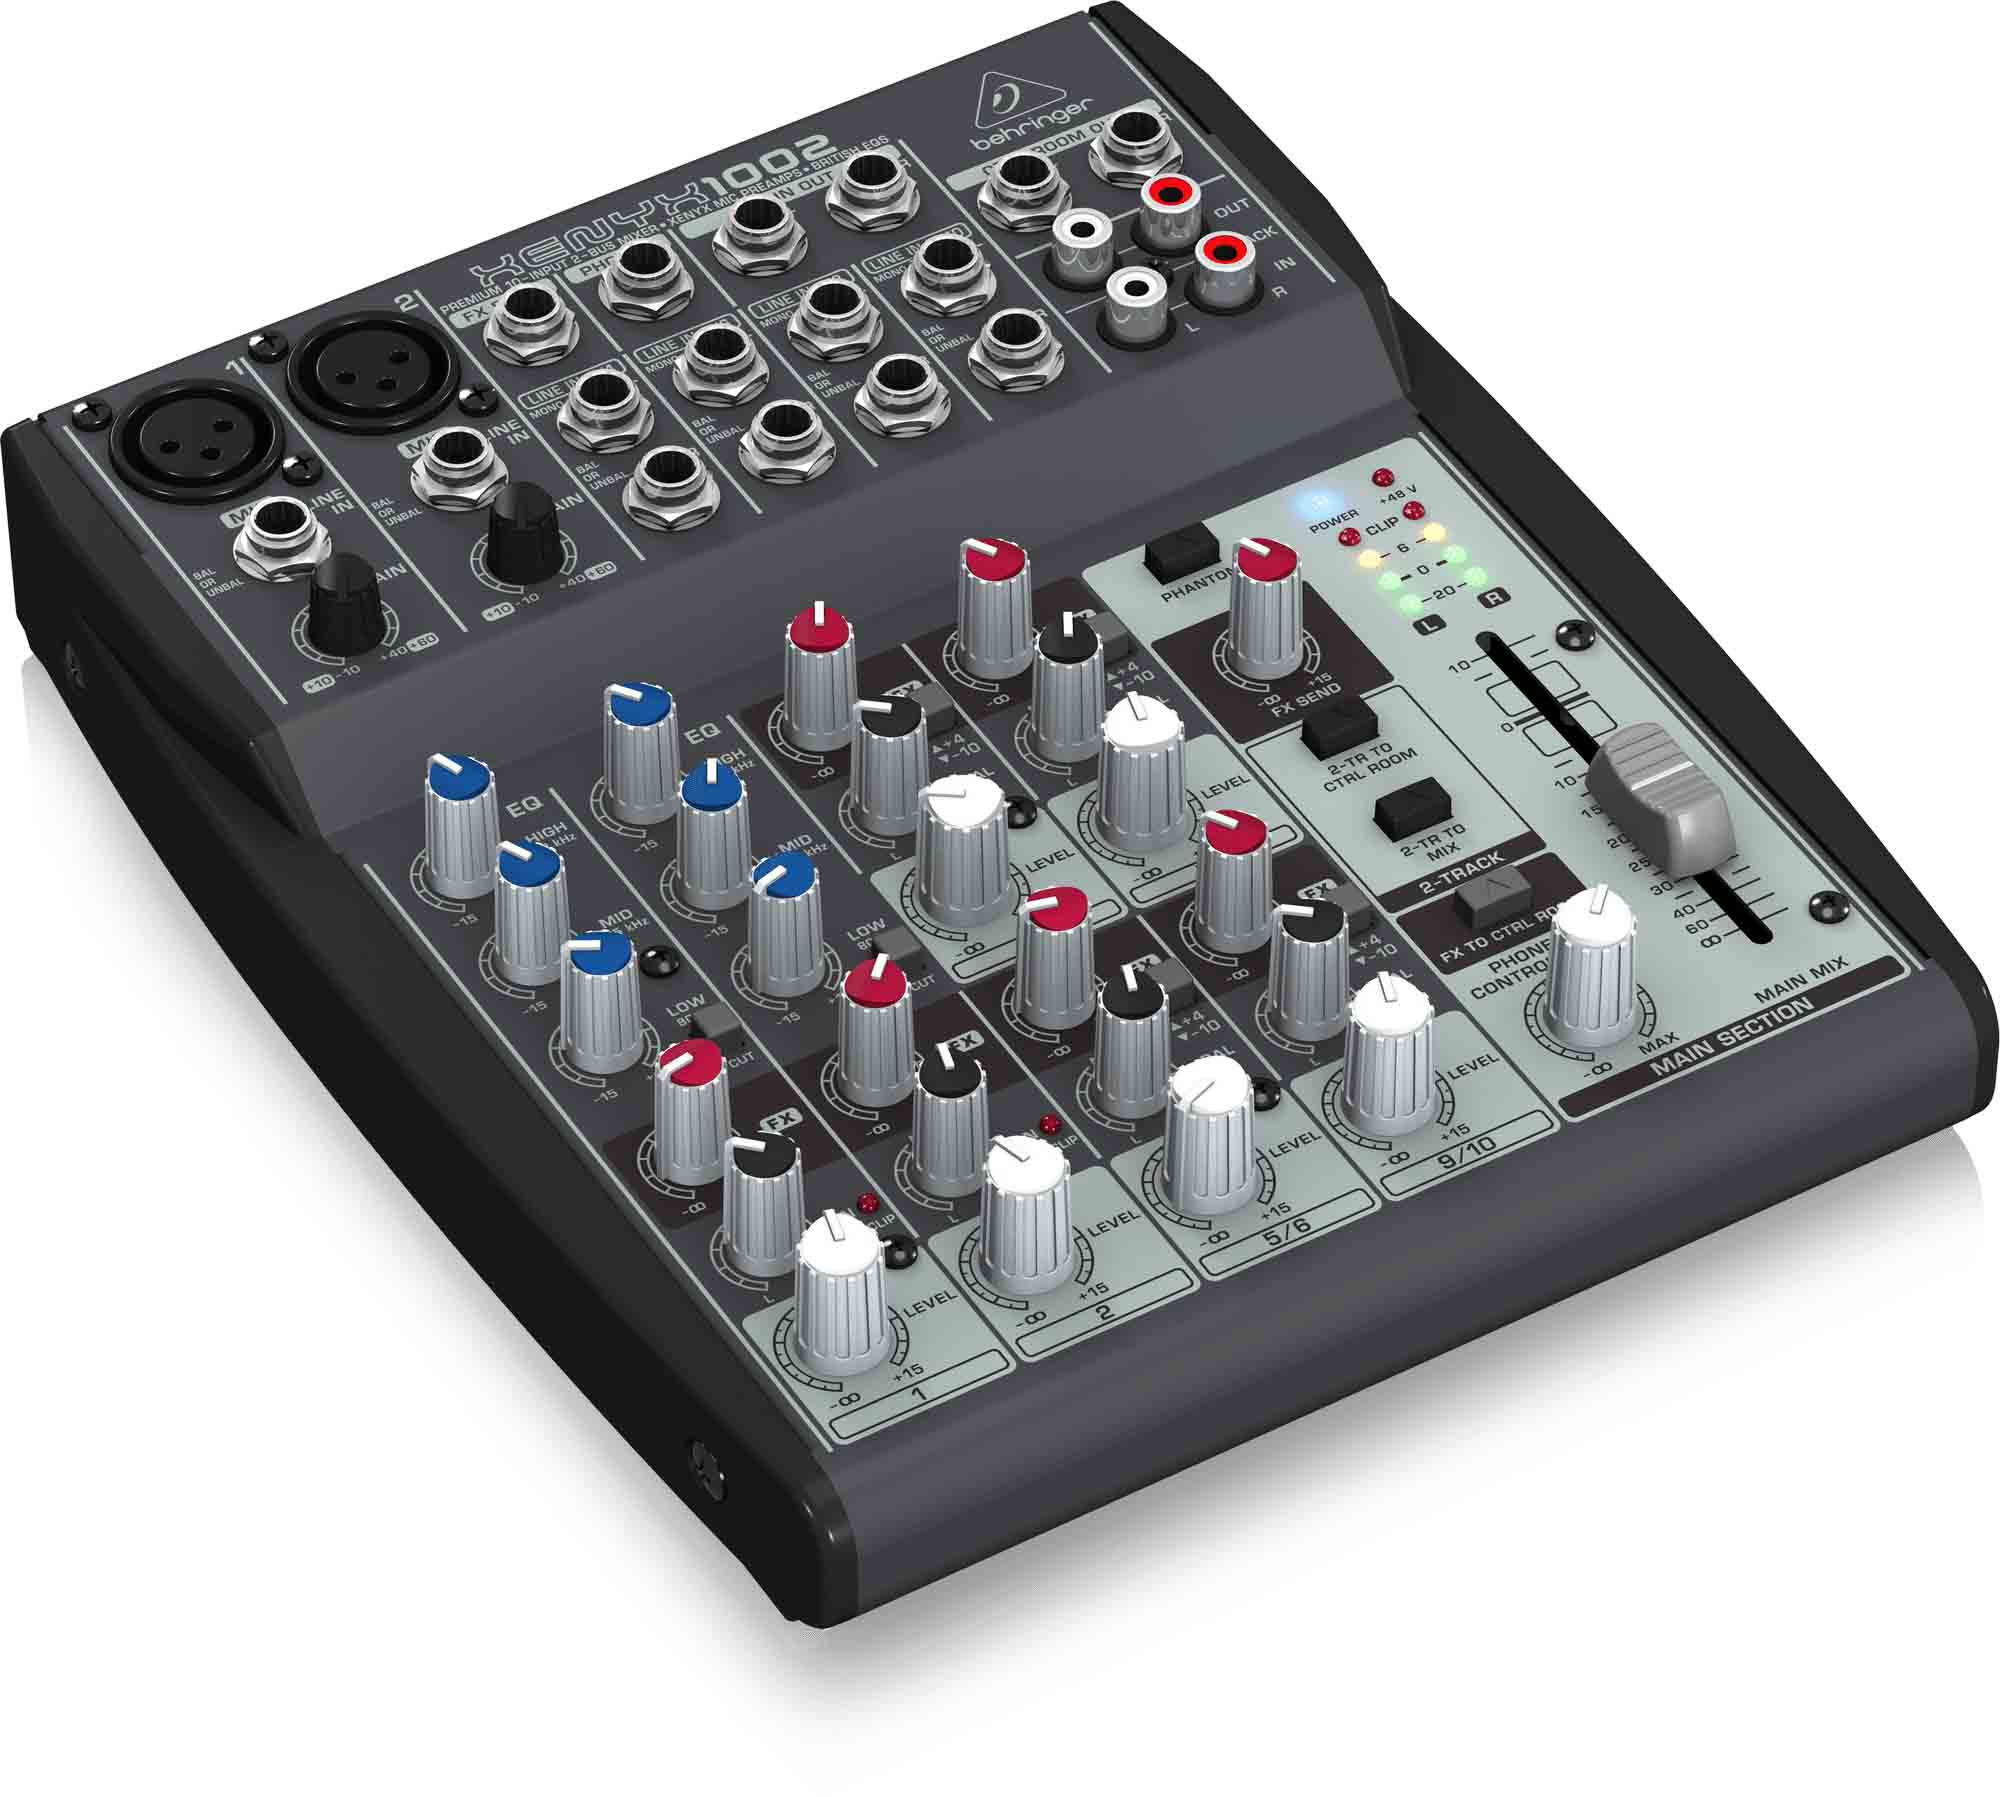 Behringer 1002 Premium 10-Input 2-Bus Mixer with XENYX Mic Preamps and British EQs - Hollywood DJ